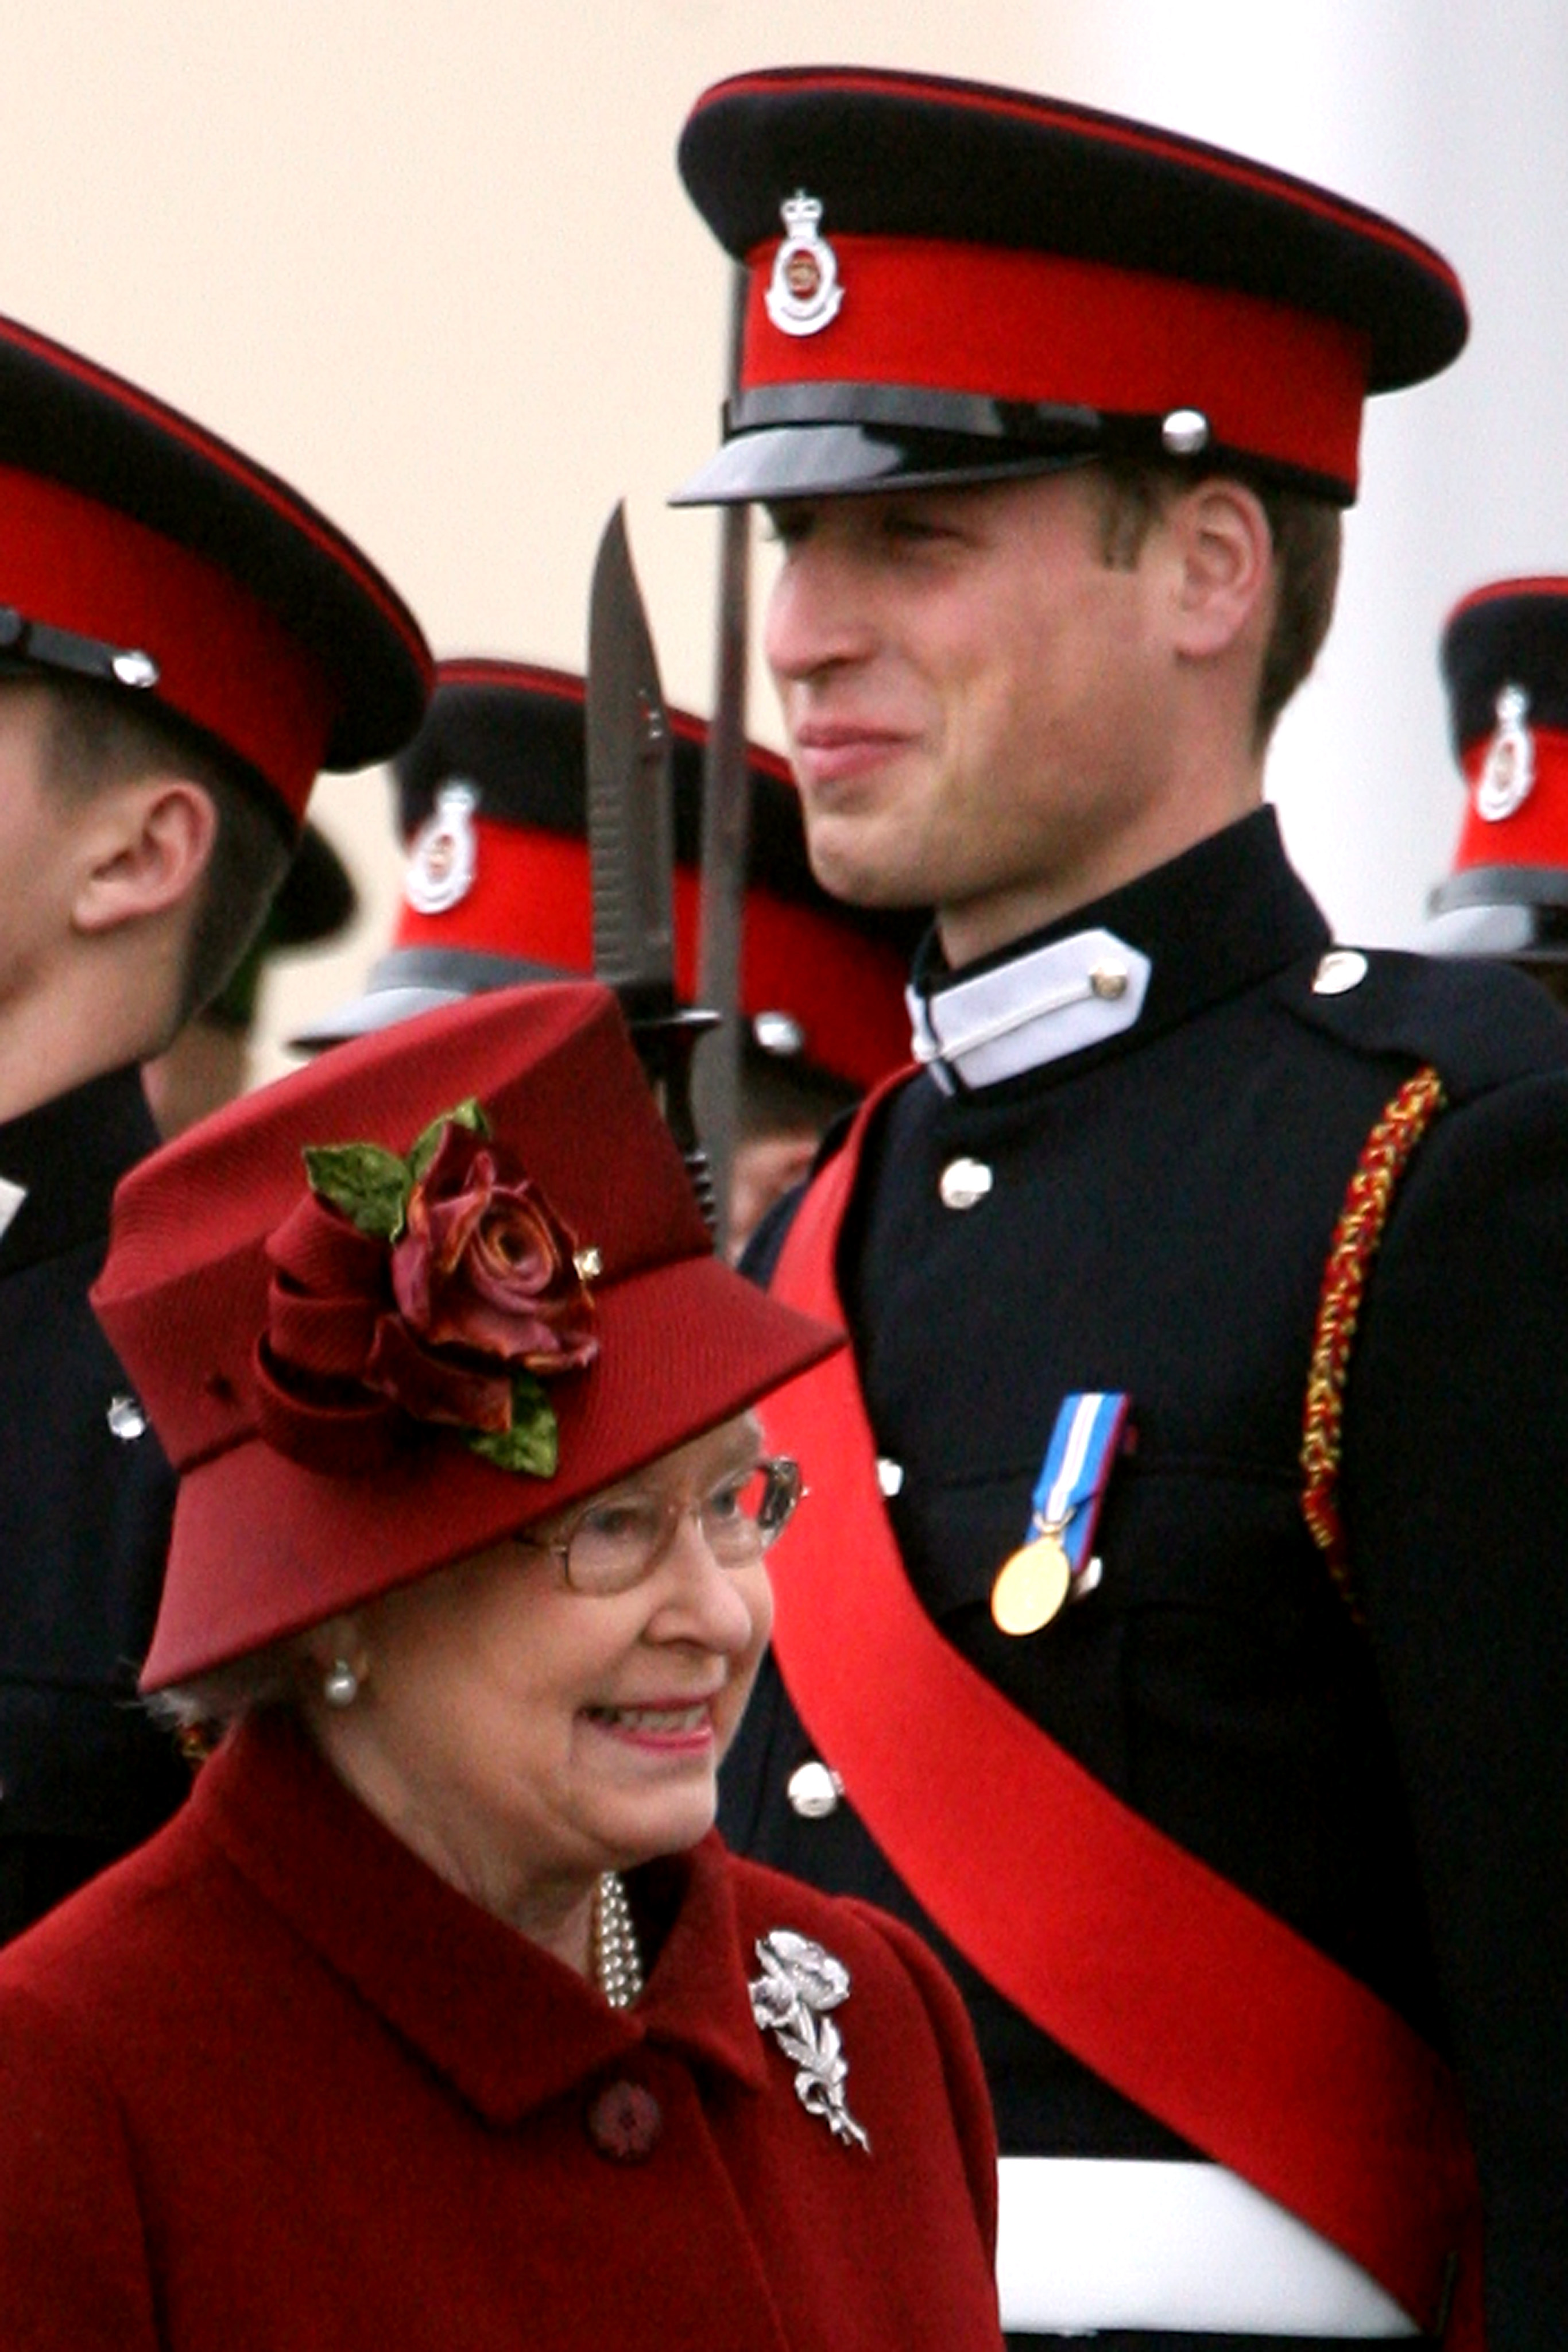 The Queen inspects the graduates, including Prince William, in the Sovereign's Parade at Sandhurst in 2006 